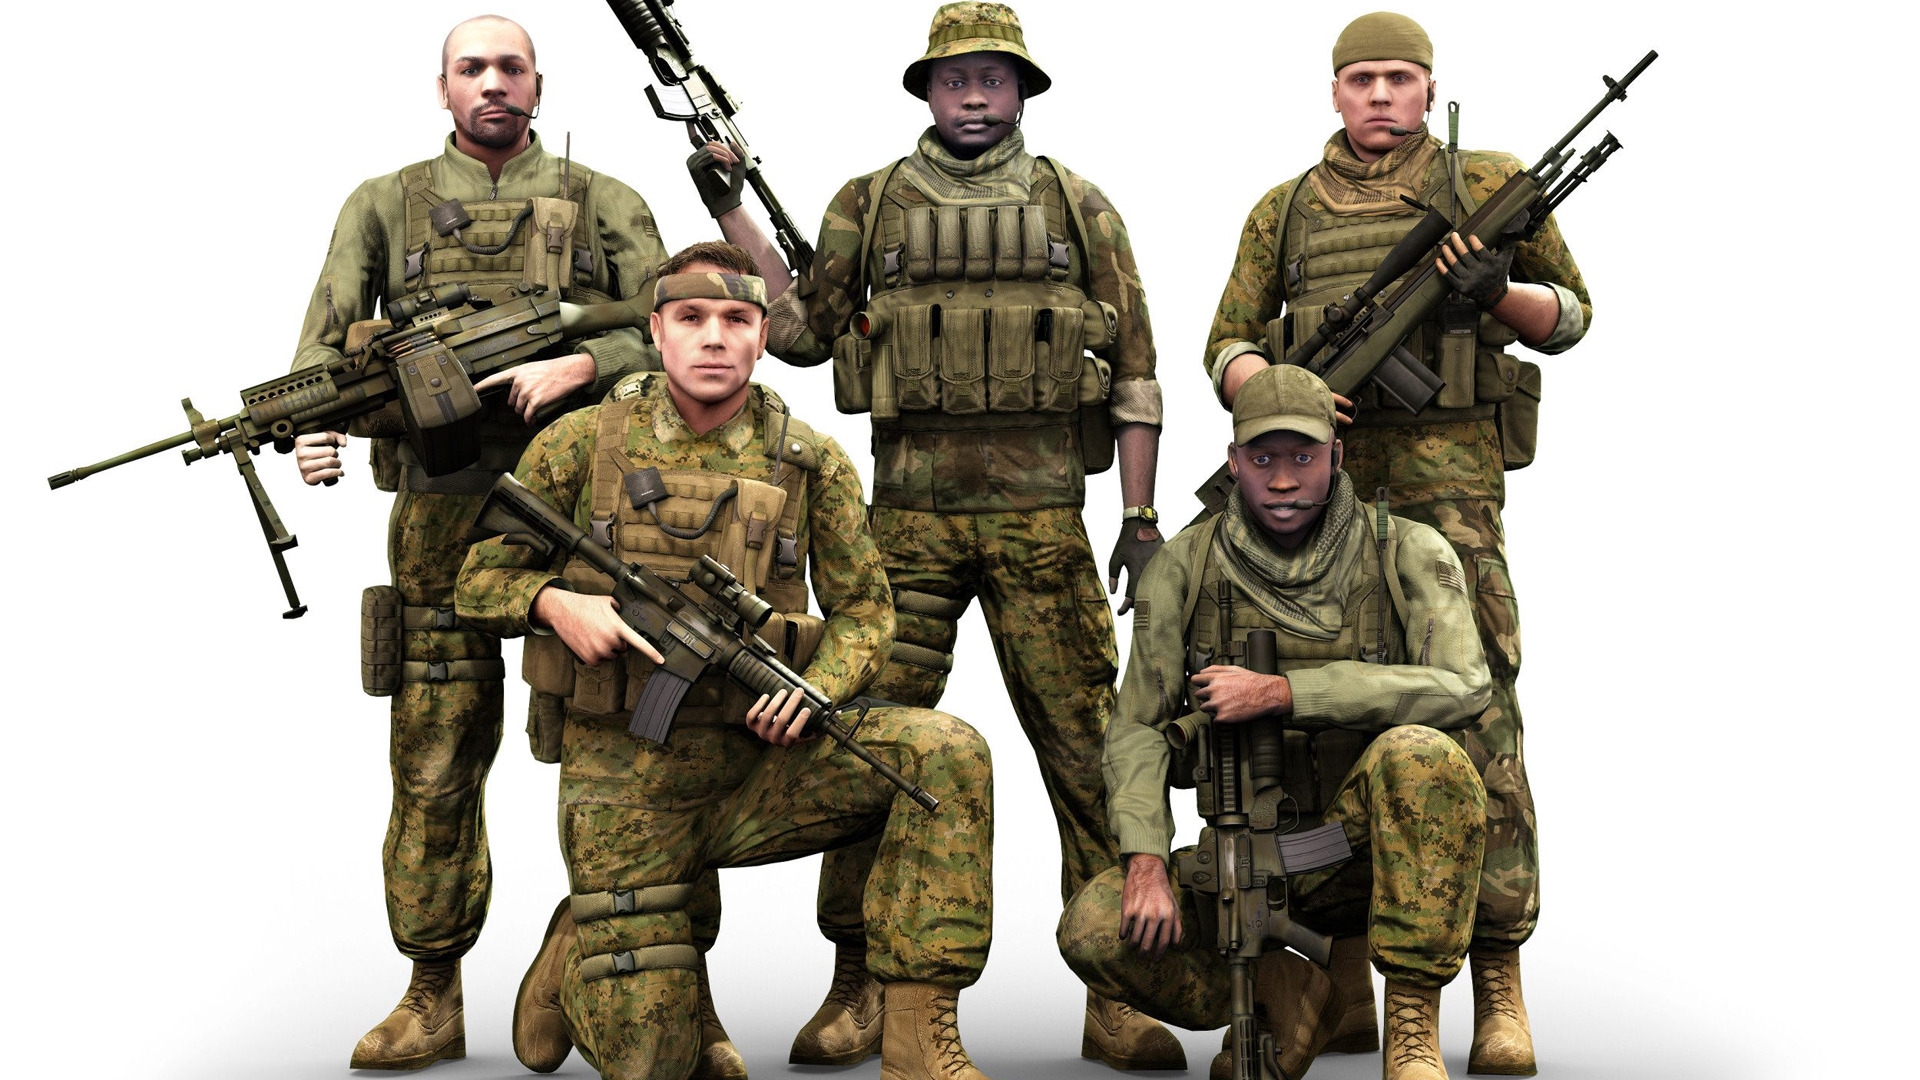 ArmA 2 Characters for 1920 x 1080 HDTV 1080p resolution